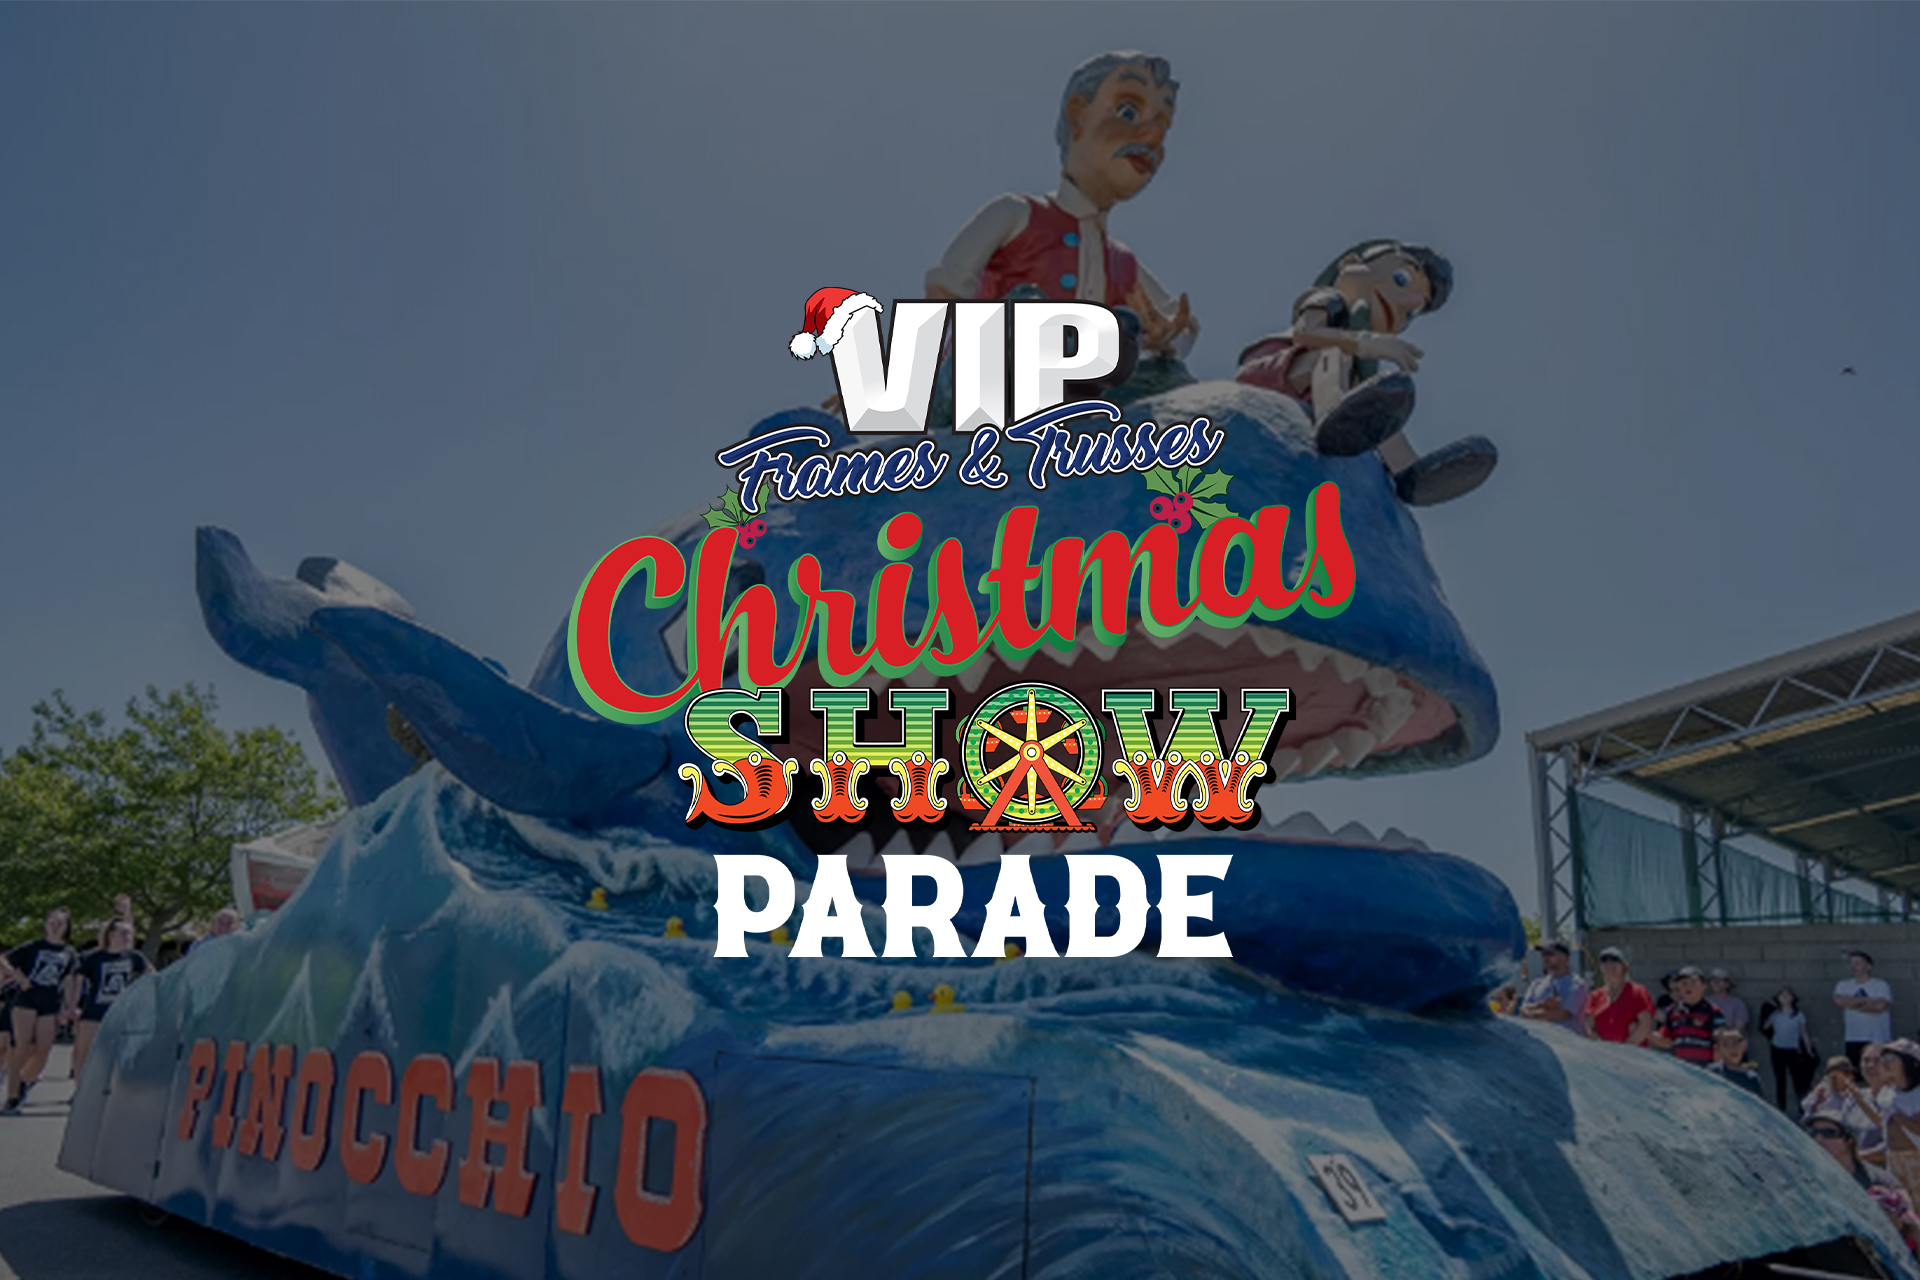 VIP Frames and Trusses Christmas Show Parade sponsors overlay for website